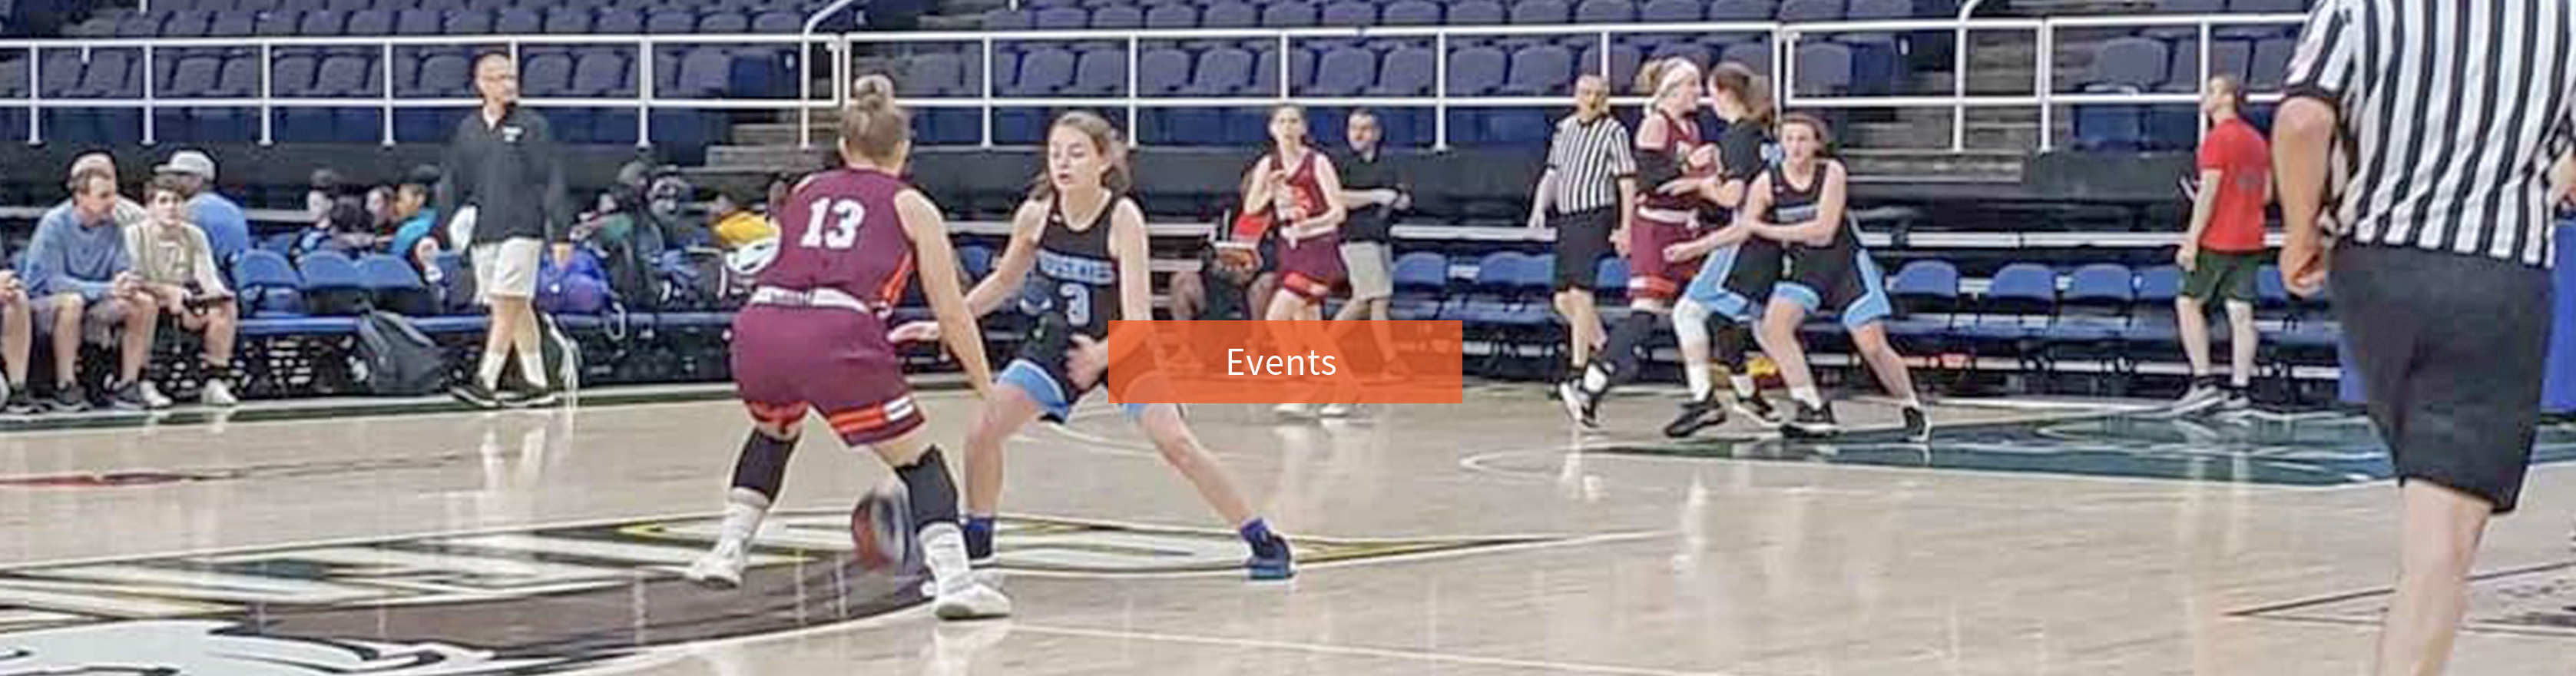 Full Court Hoops Basketball Events